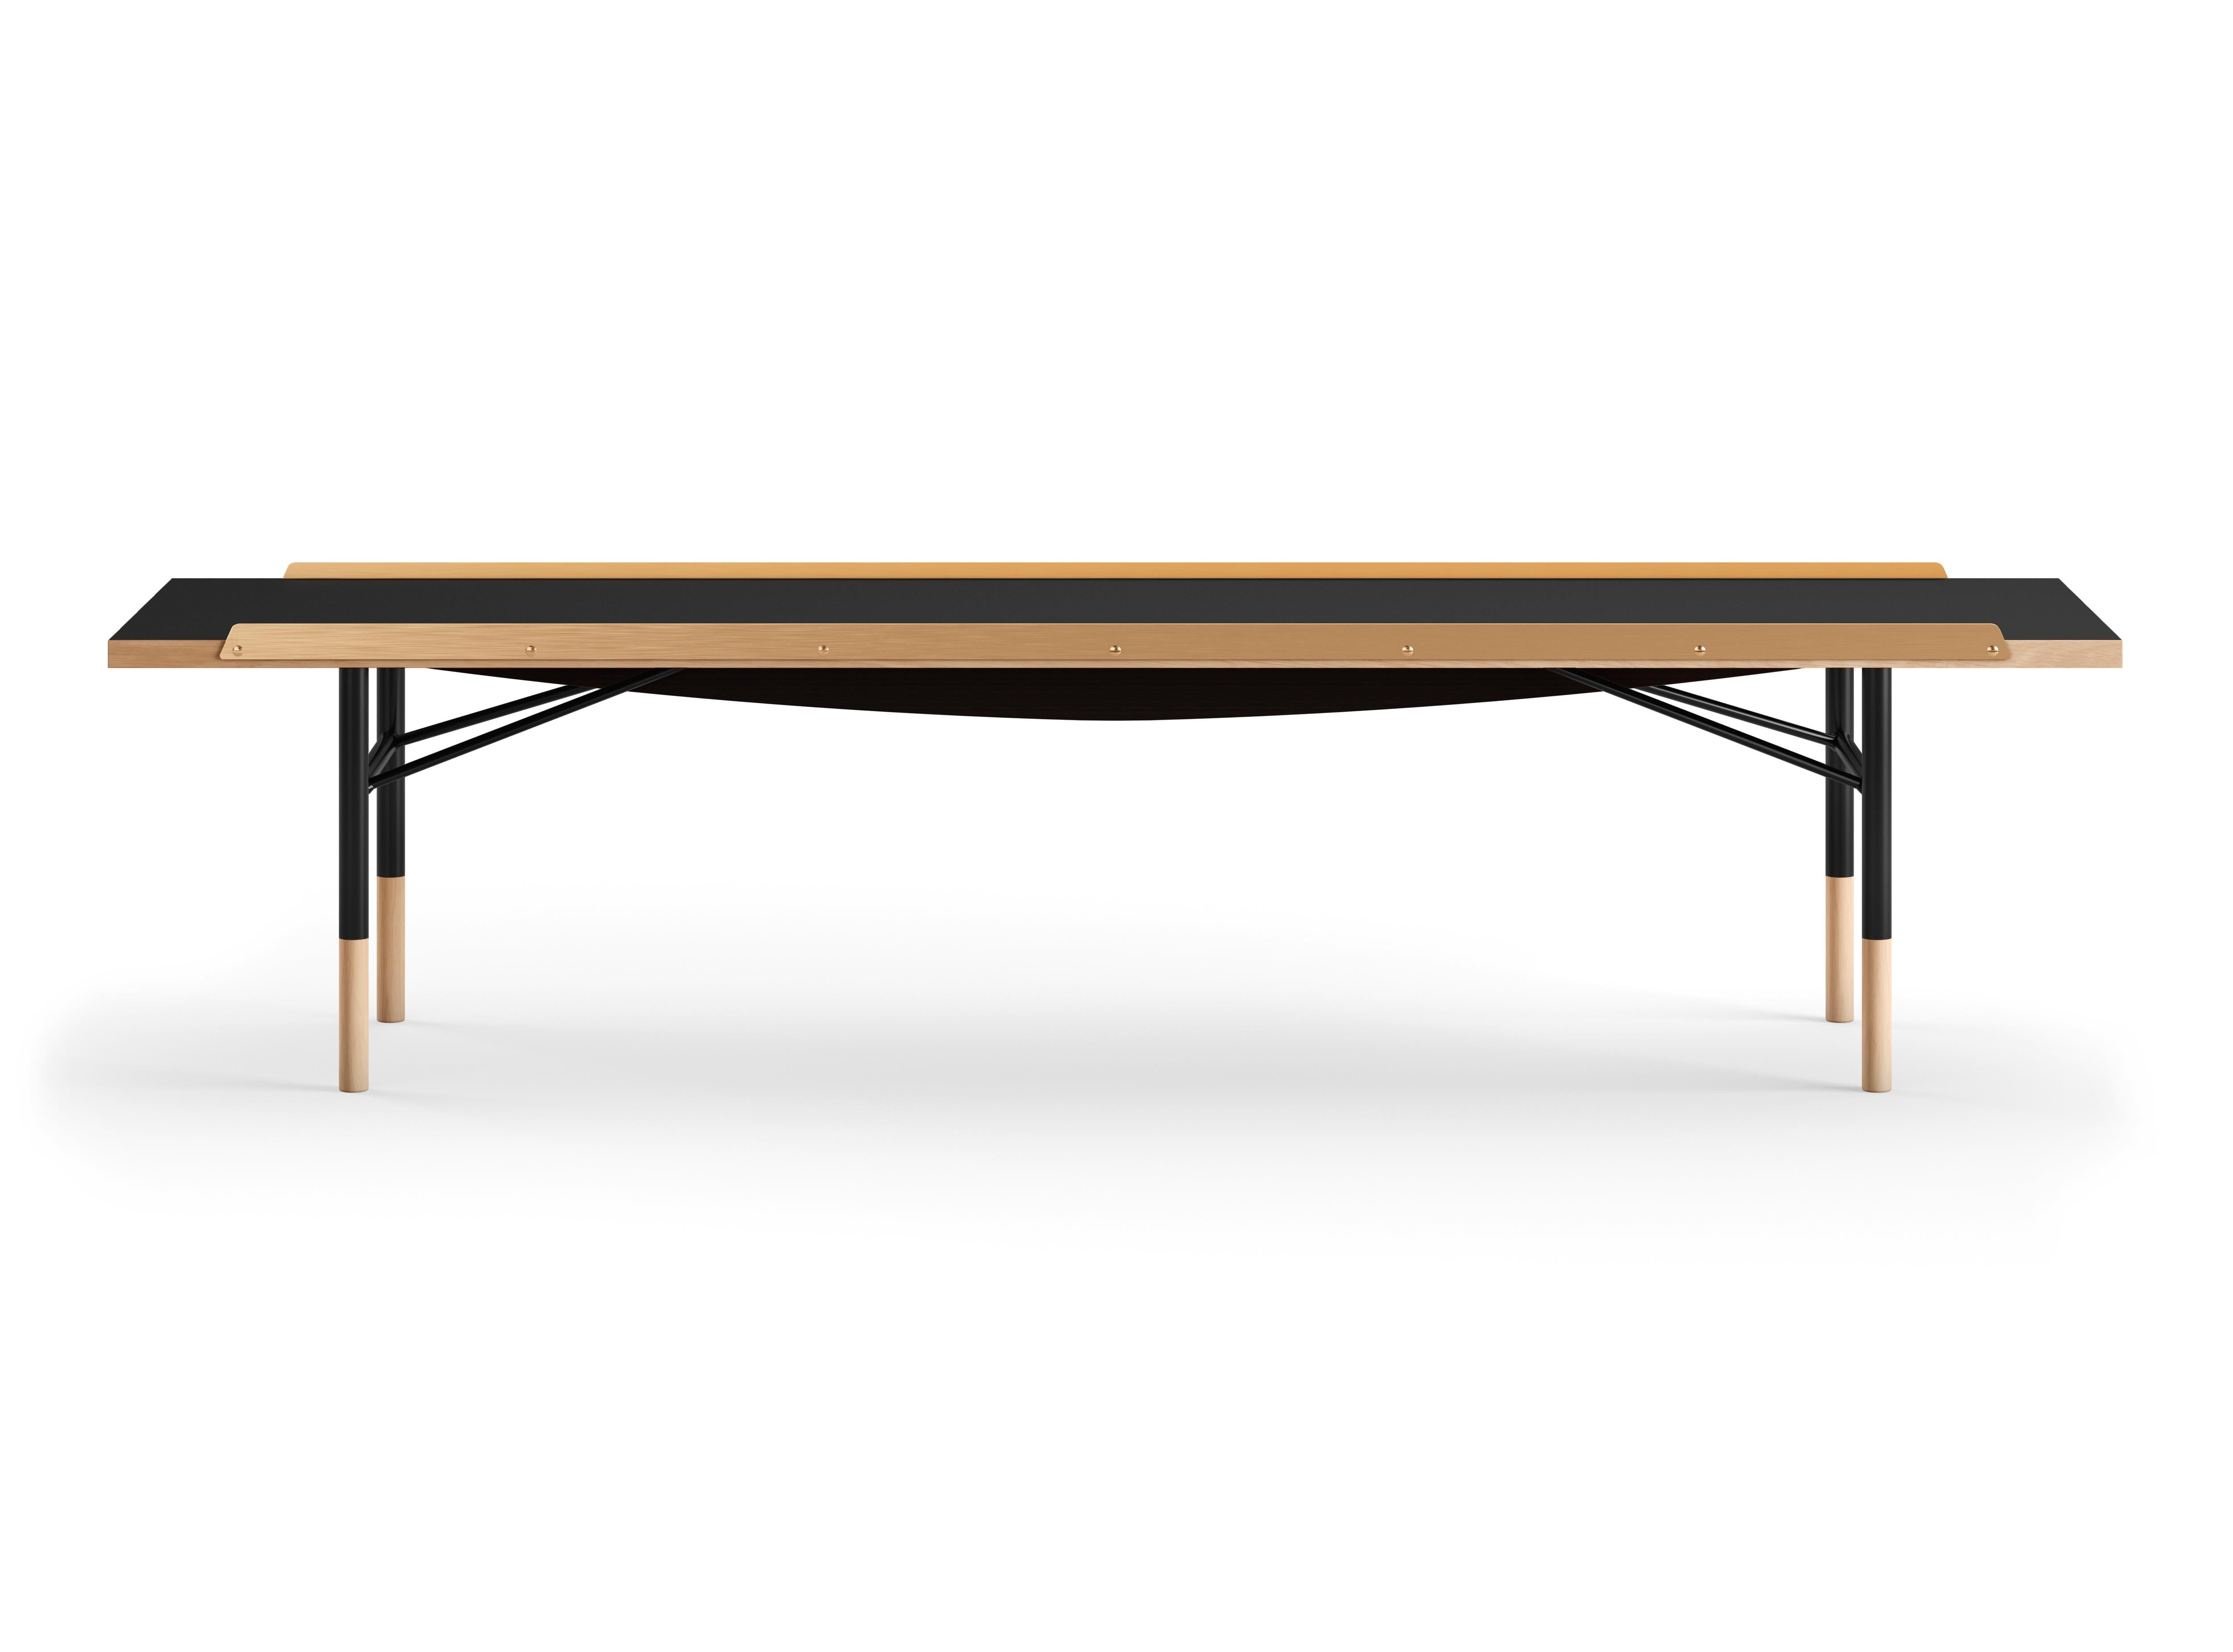 Table bench designed by Finn Juhl in 1953, relaunched in 2012.
Manufactured by House of Finn Juhl in Denmark.

Finn Juhl experienced an international breakthrough in the USA during the early 1950s. He subsequently designed a range of furniture